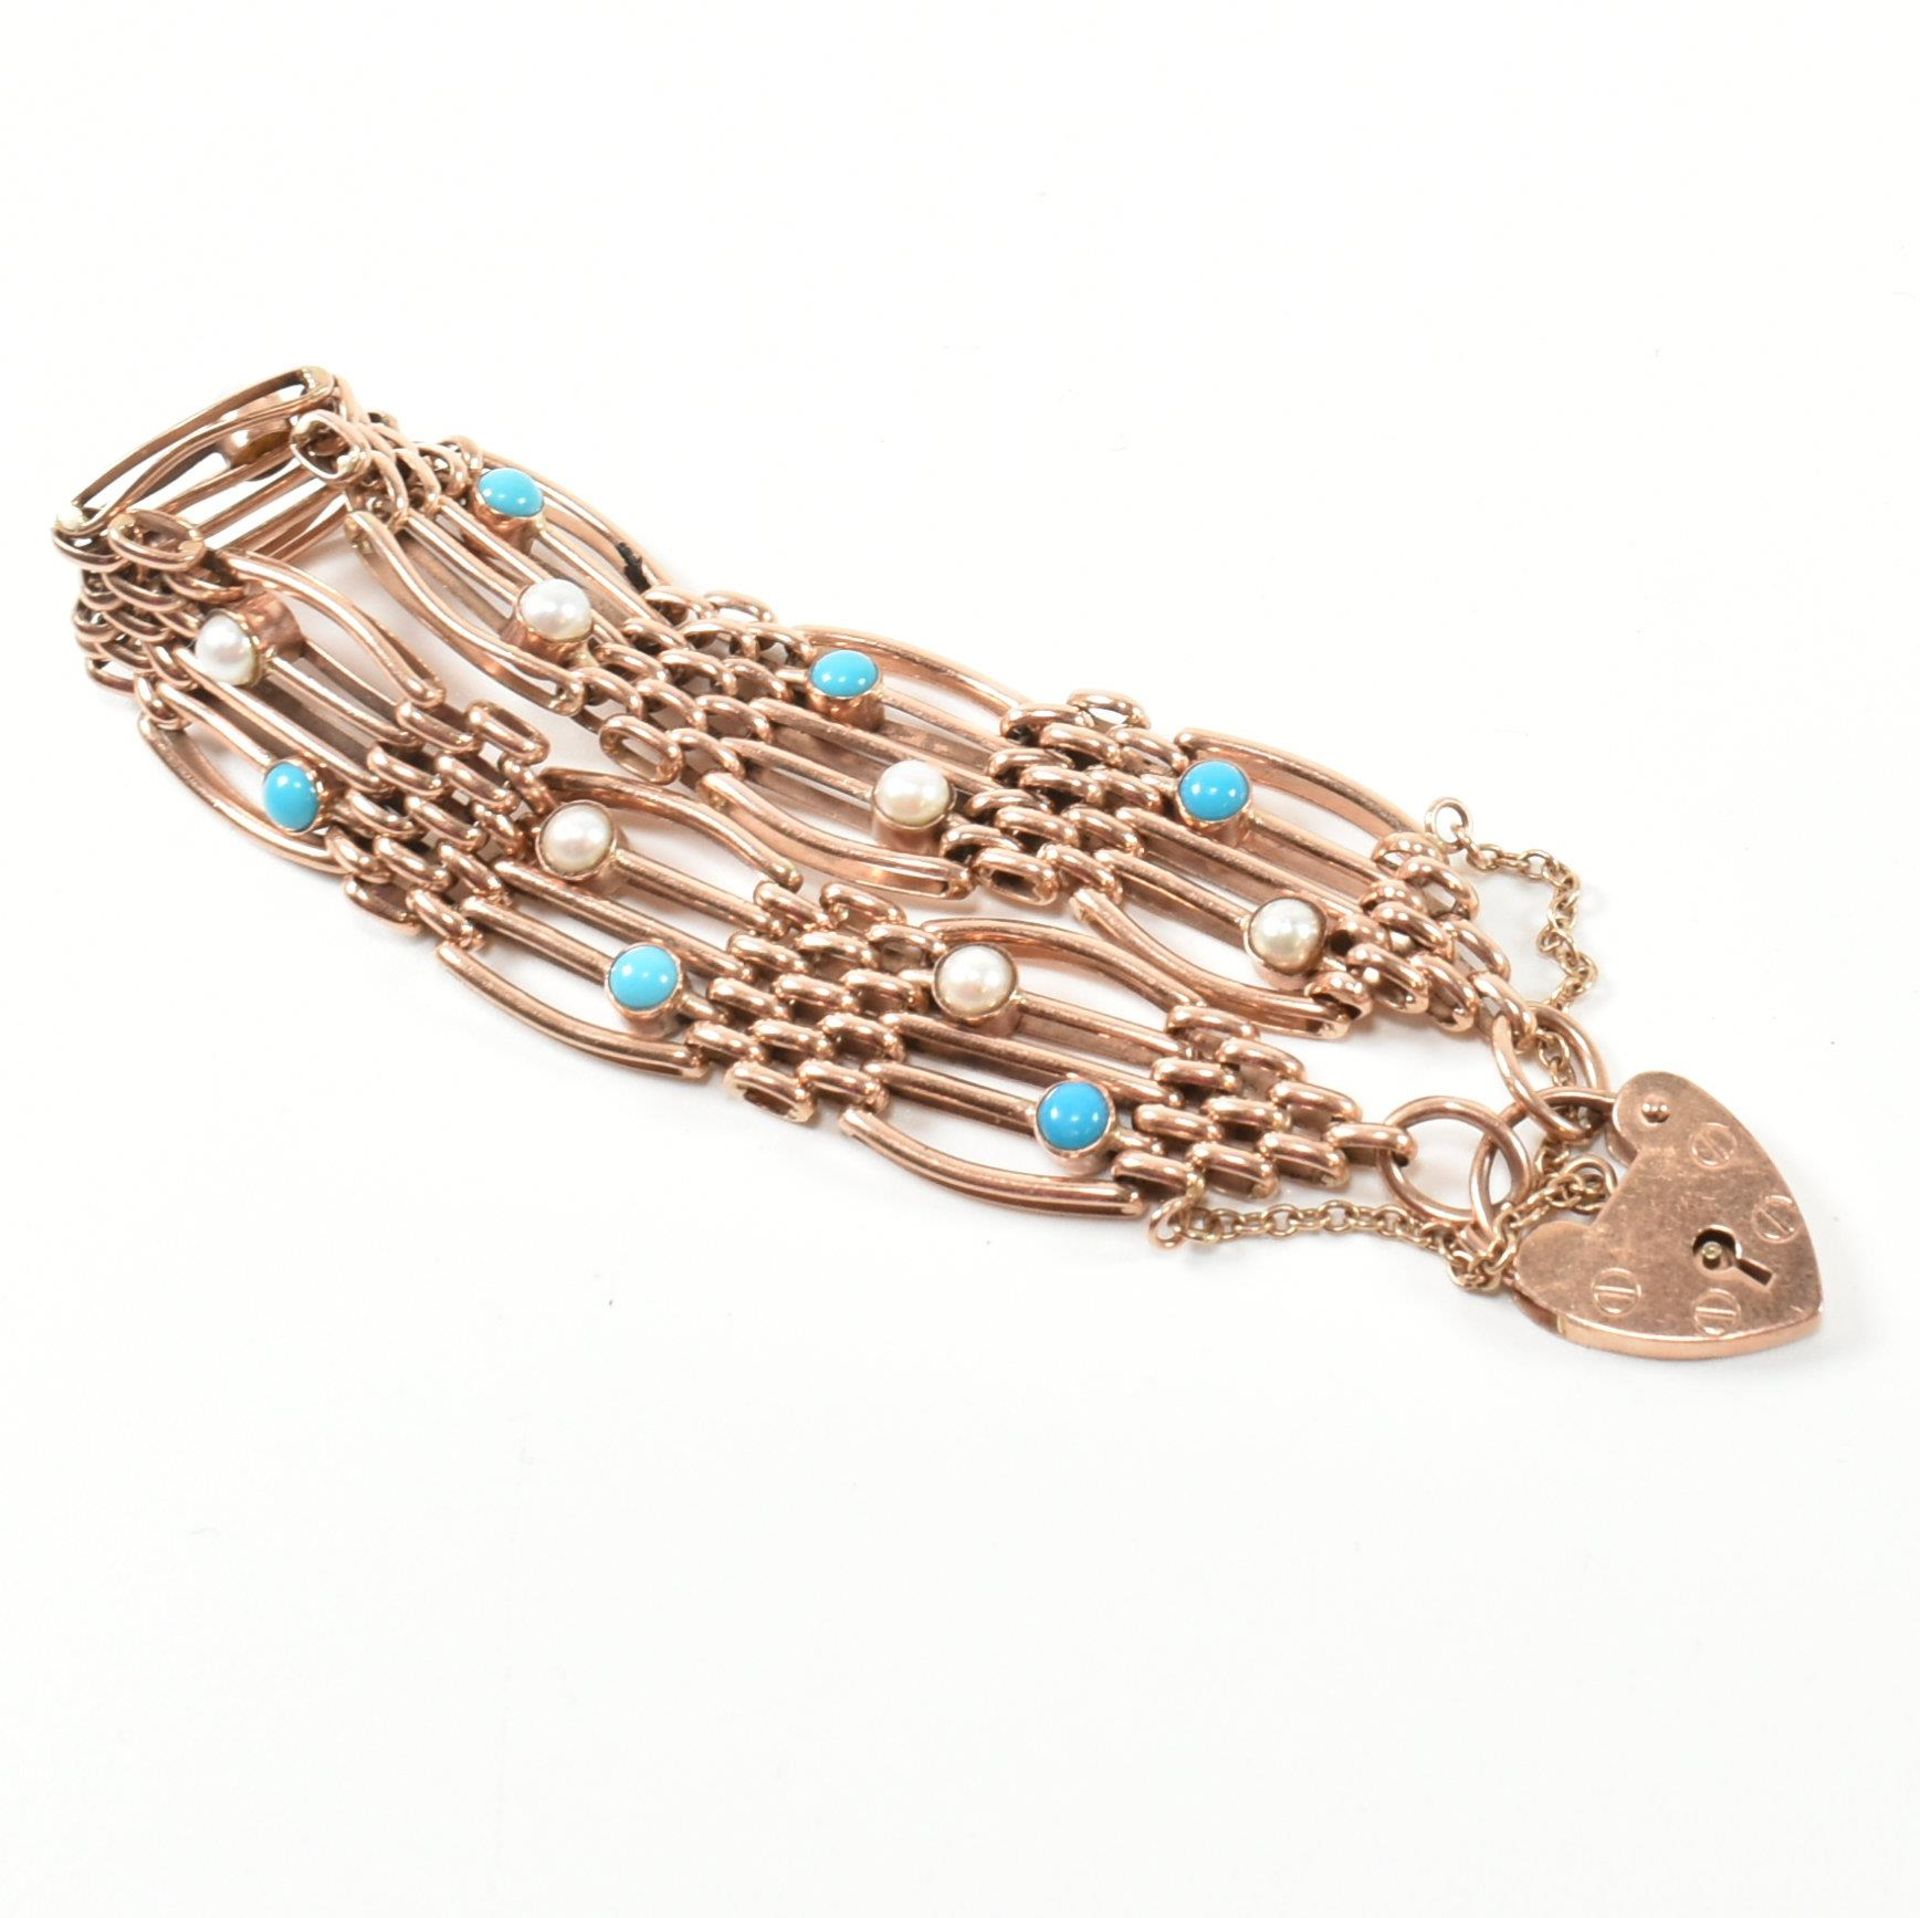 HALLMARKED 9CT ROSE GOLD PEARL & TURQUOISE GATE LINK BRACELET - Image 3 of 9